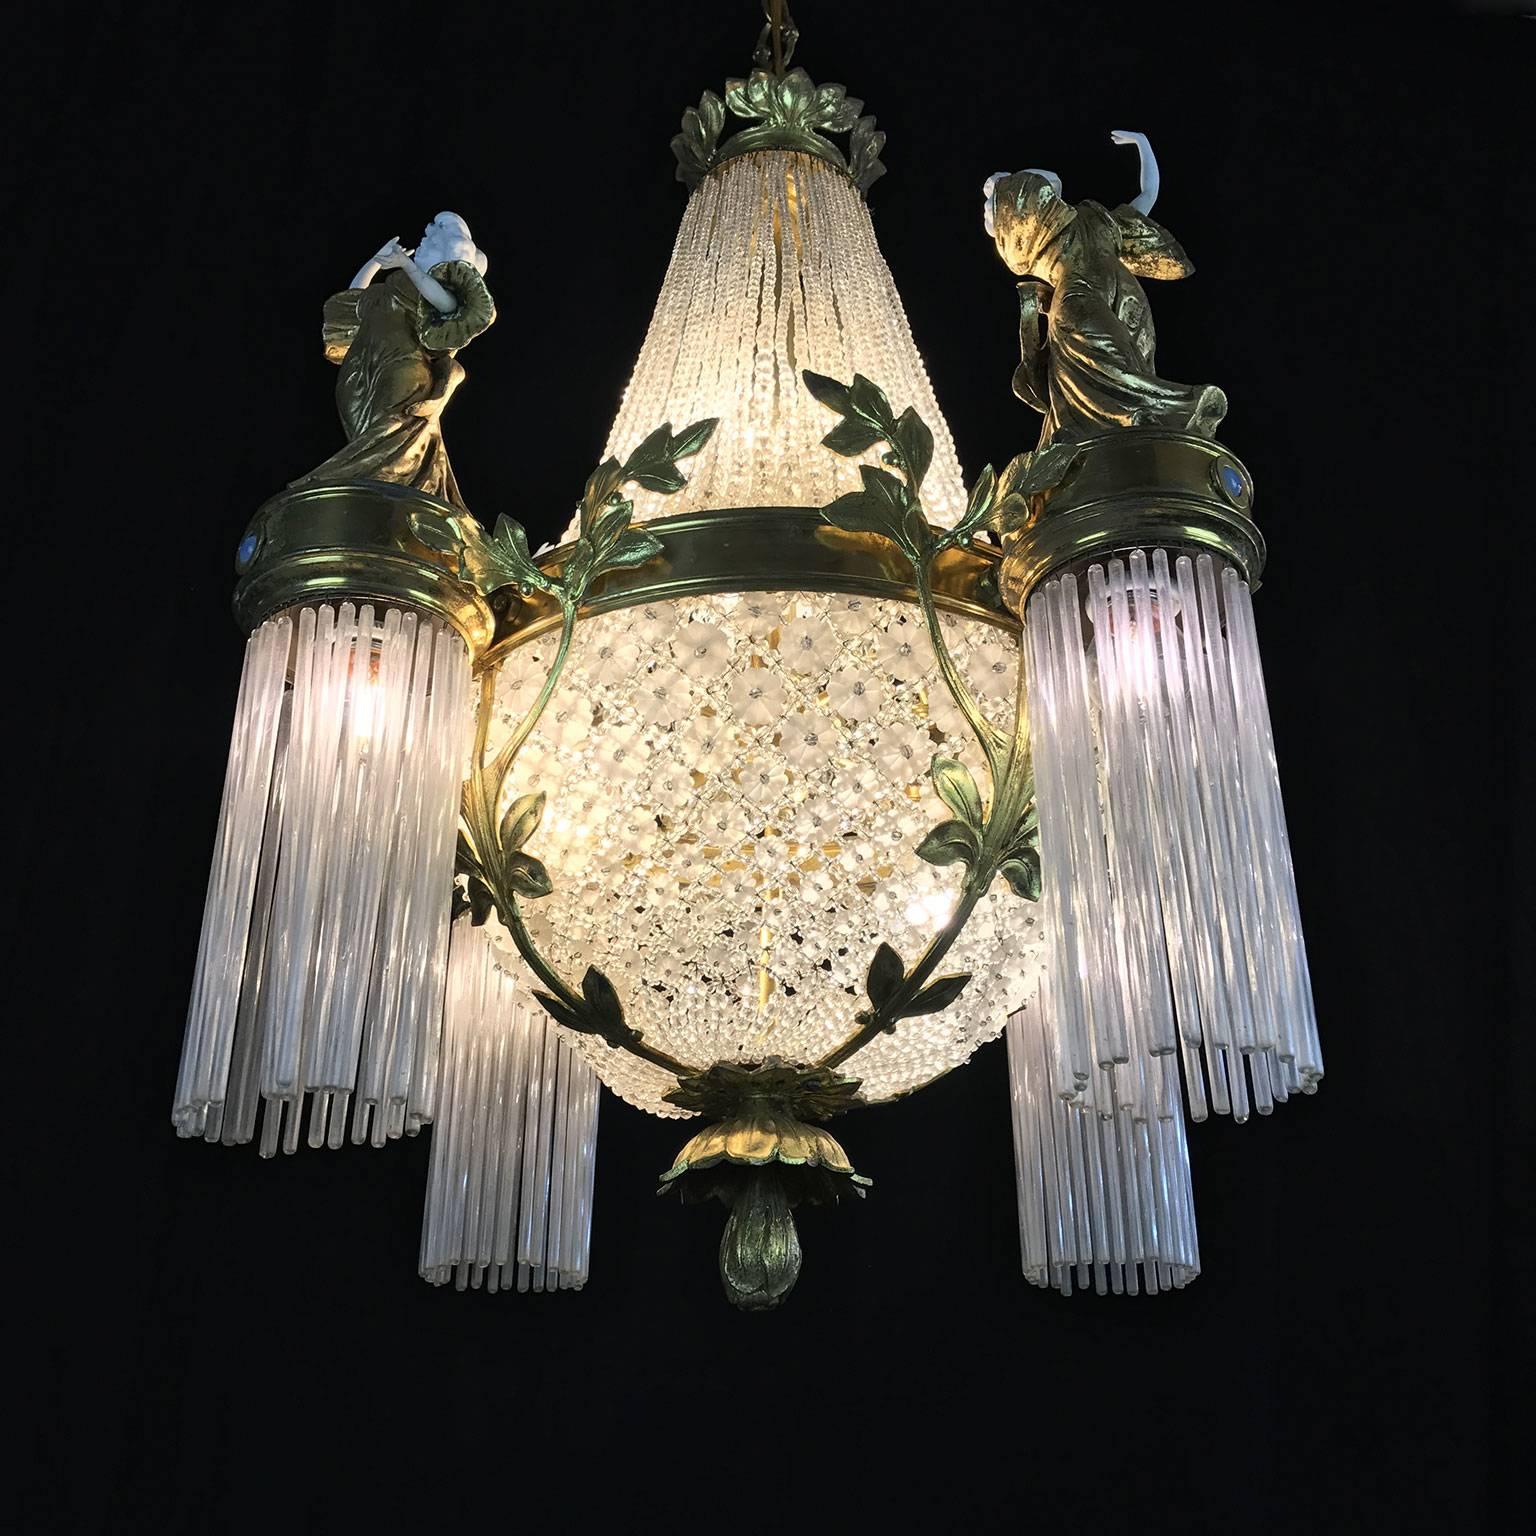 Exclusive French gilt bronze, crystal and porcelain figural eight-light chandelier dating back to circa 1910, in perfect condition.

This original French Art Nouveau chandelier, pendant has a unique circular cast bronze frame with very detailing